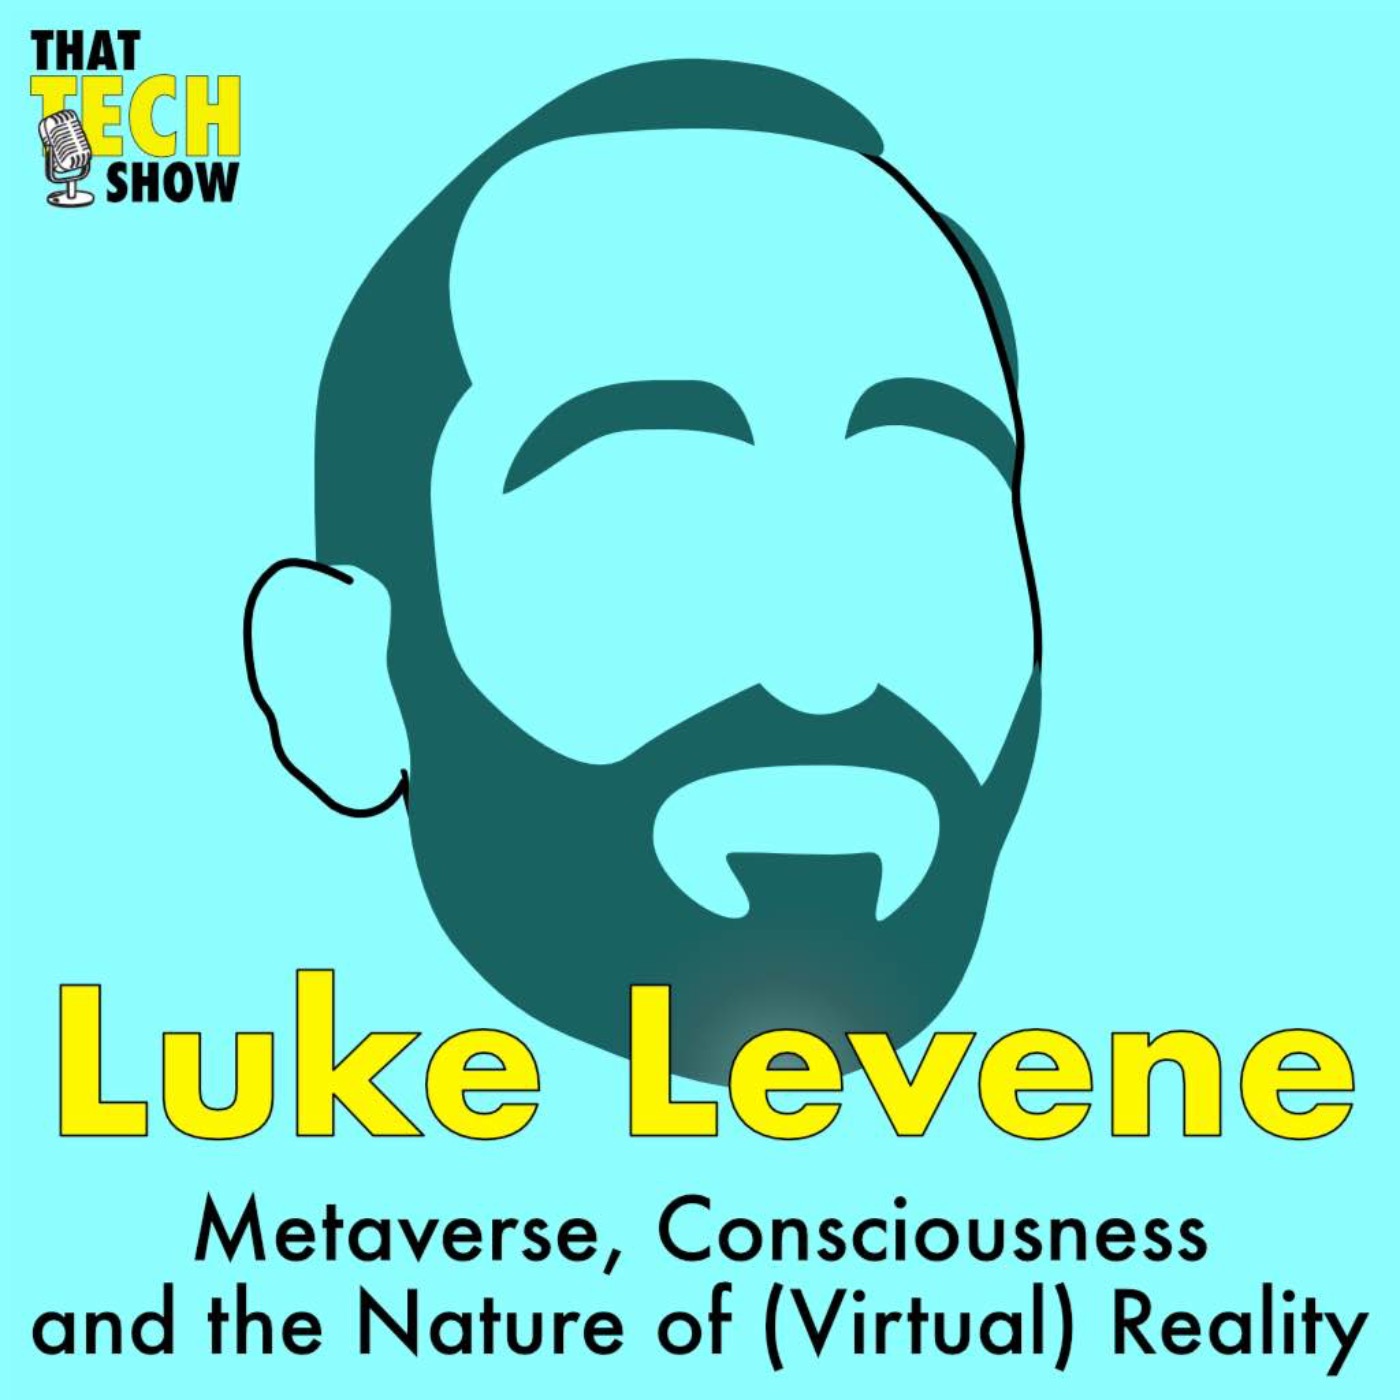 Episode 41 - Metaverse, Consciousness and the Nature of (Virtual) Reality with Luke Levene